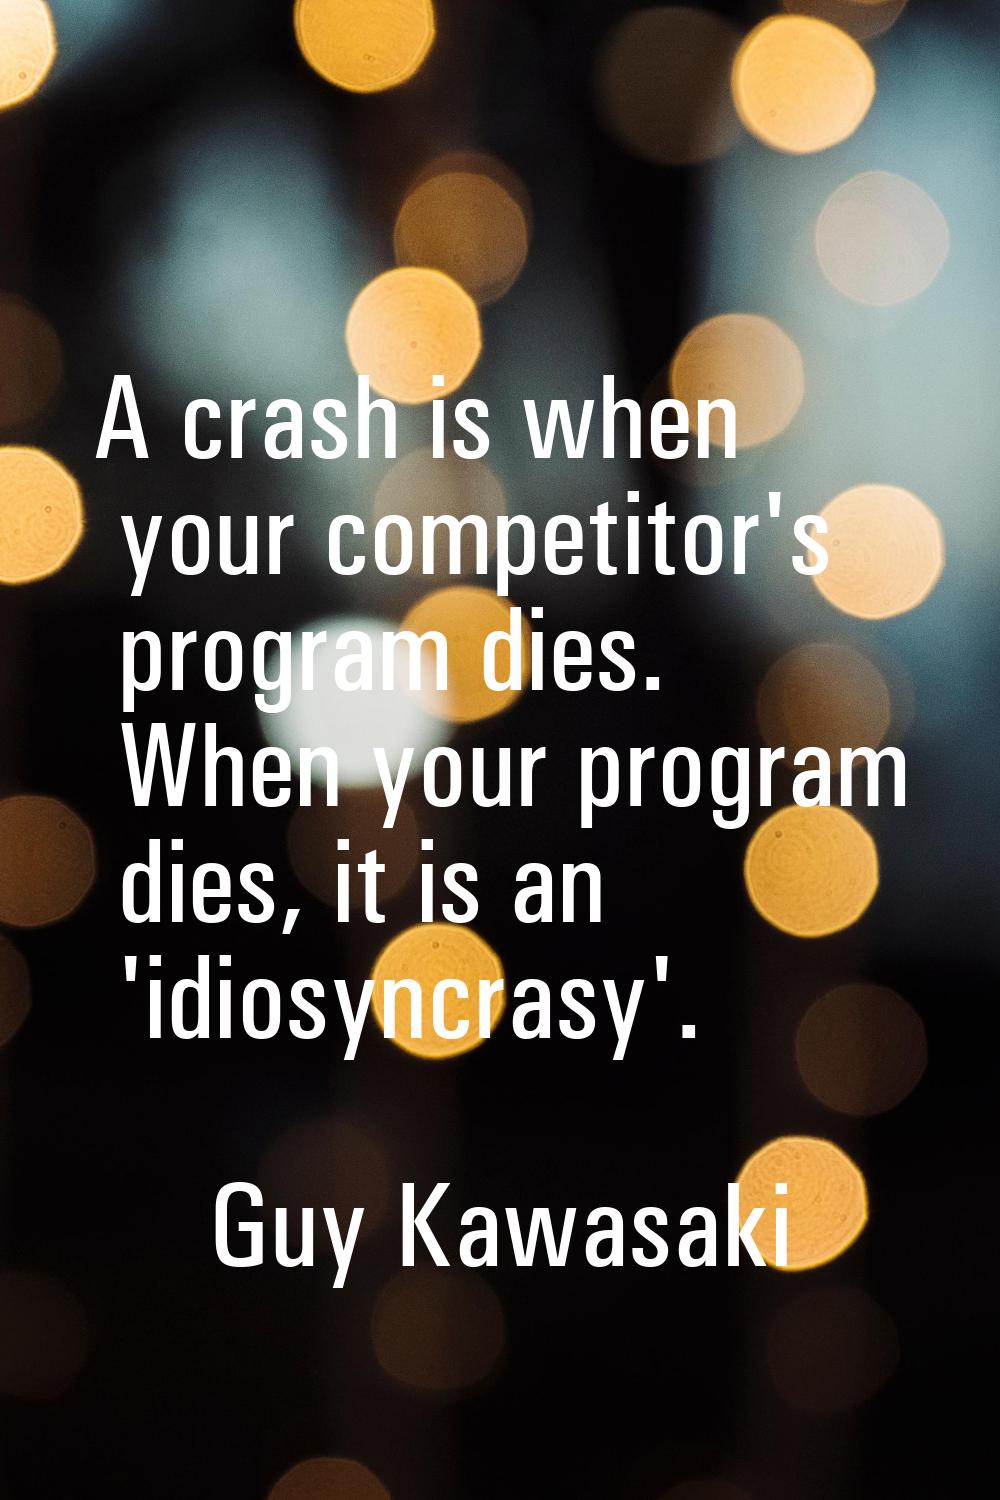 A crash is when your competitor's program dies. When your program dies, it is an 'idiosyncrasy'.